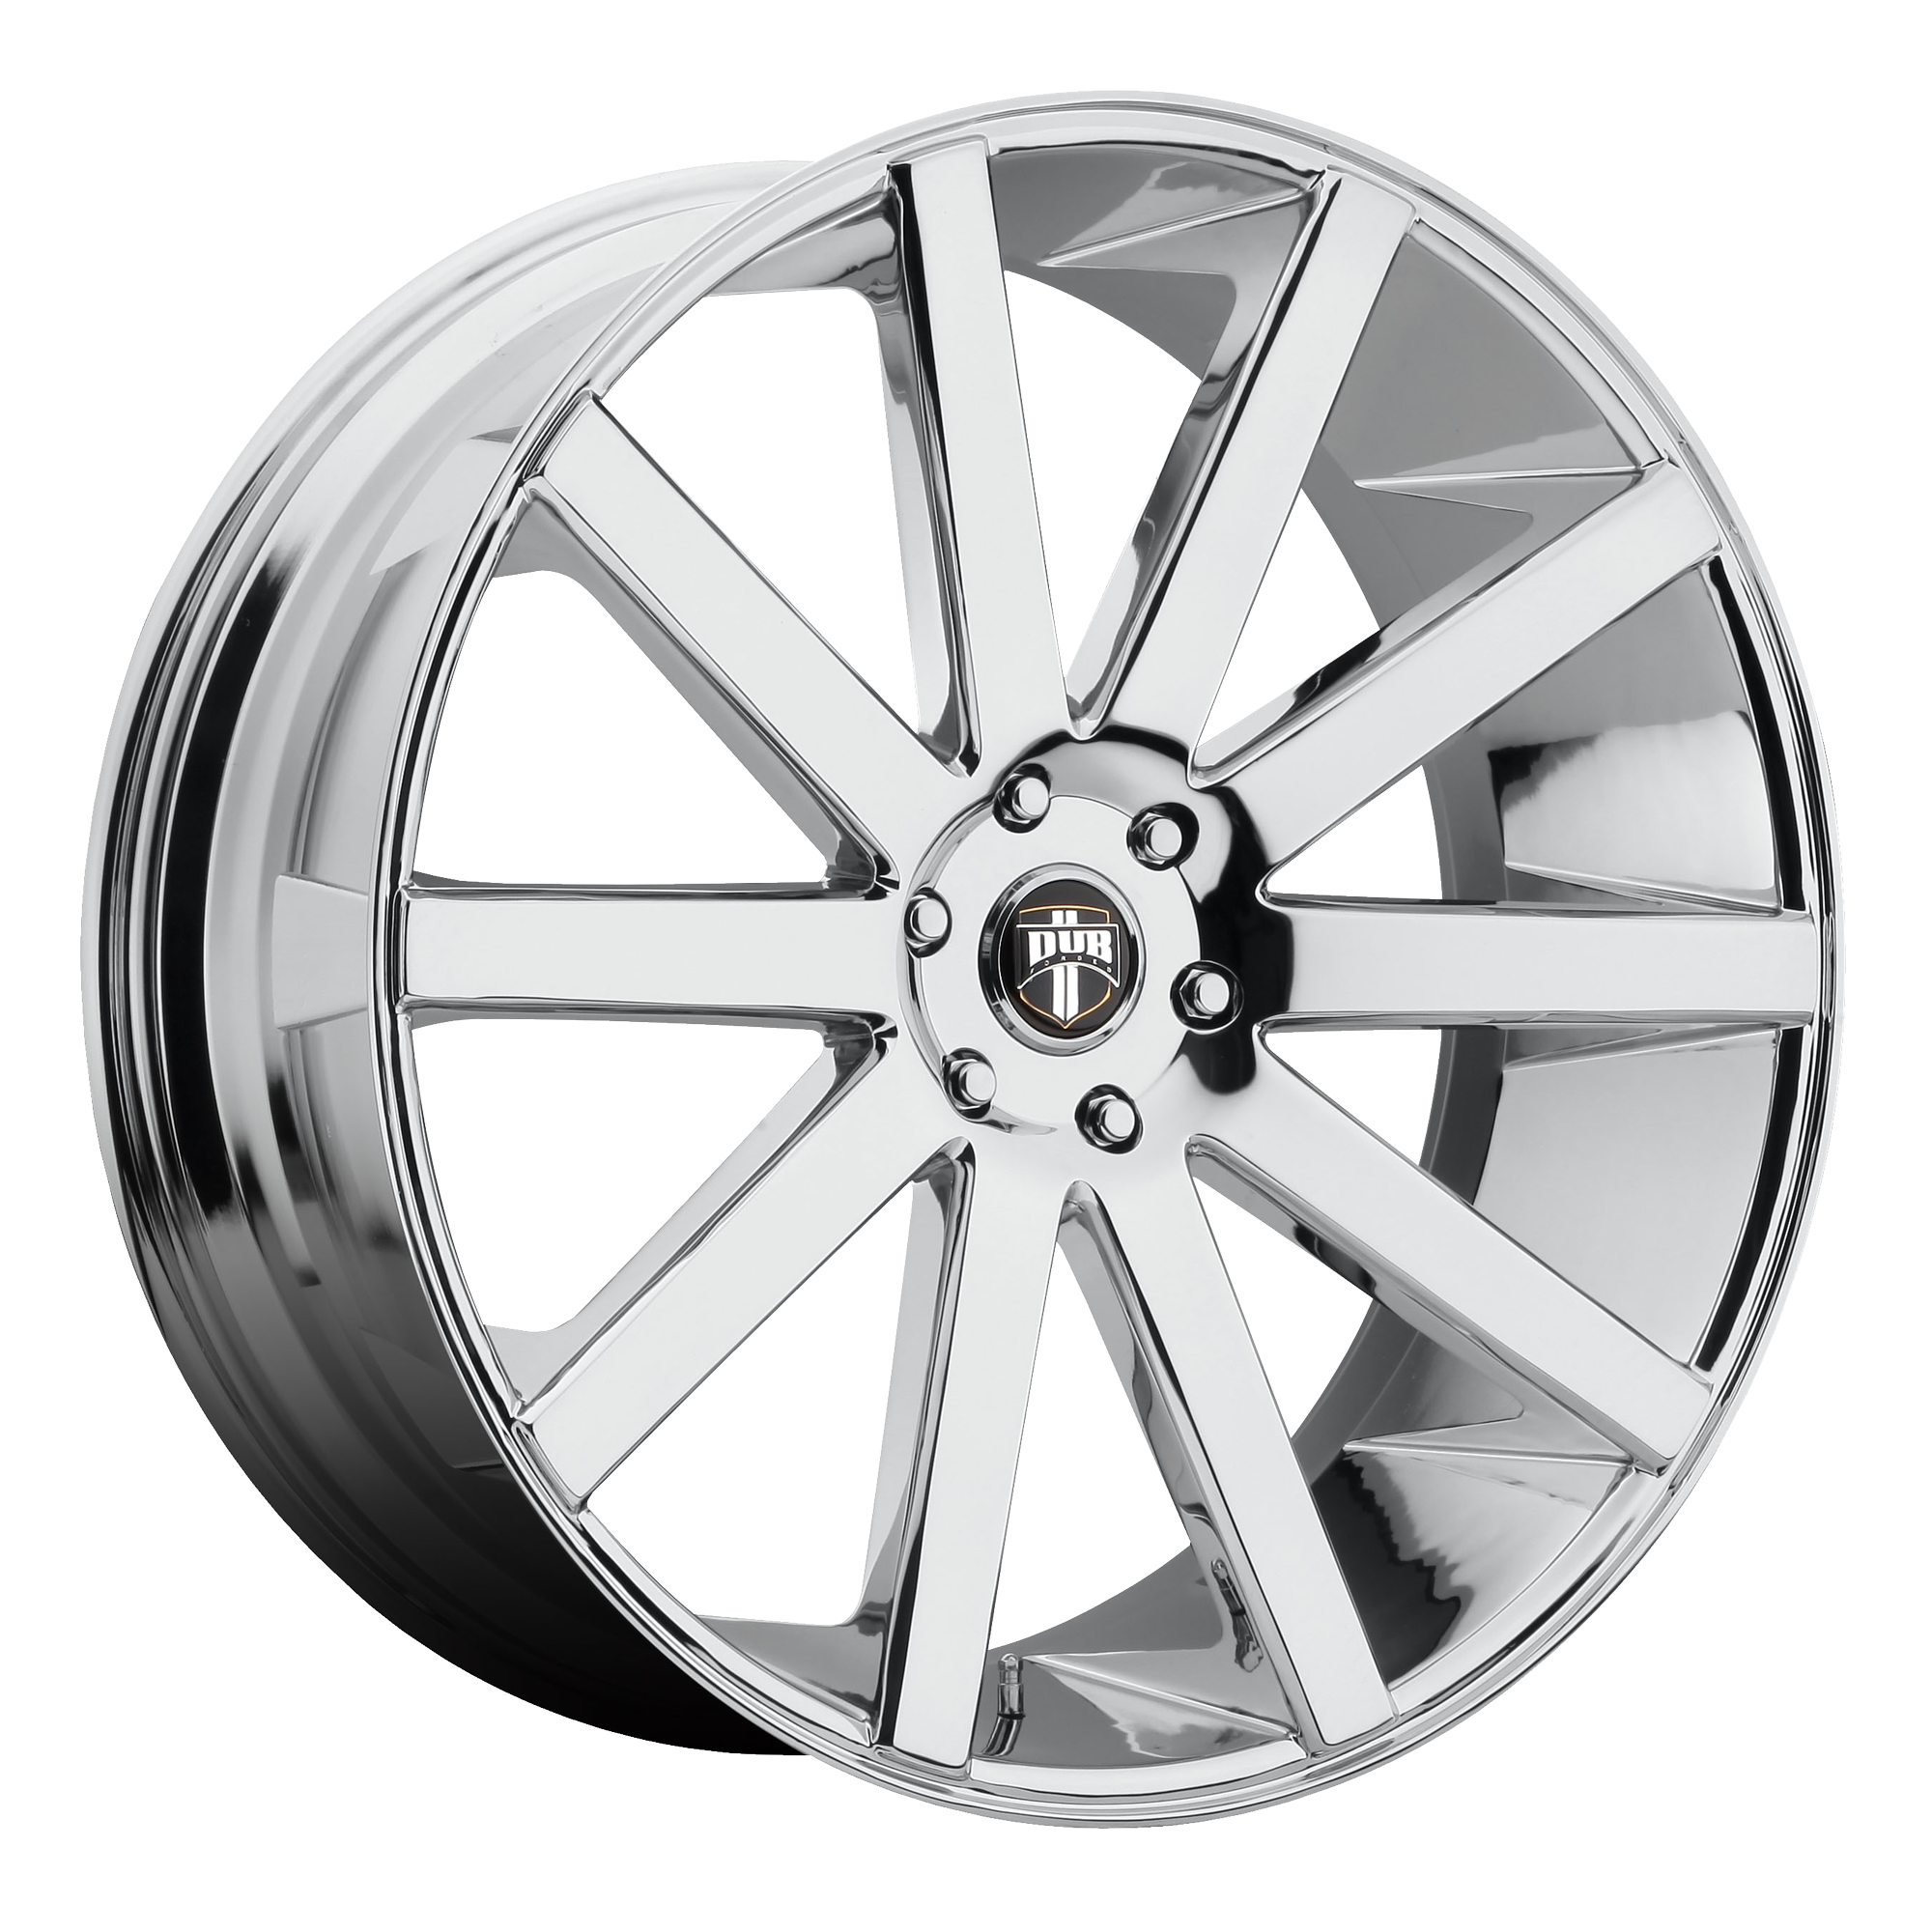 SHOT CALLA 22x9.5 6x139.70 CHROME PLATED (20 mm) - Tires and Engine Performance